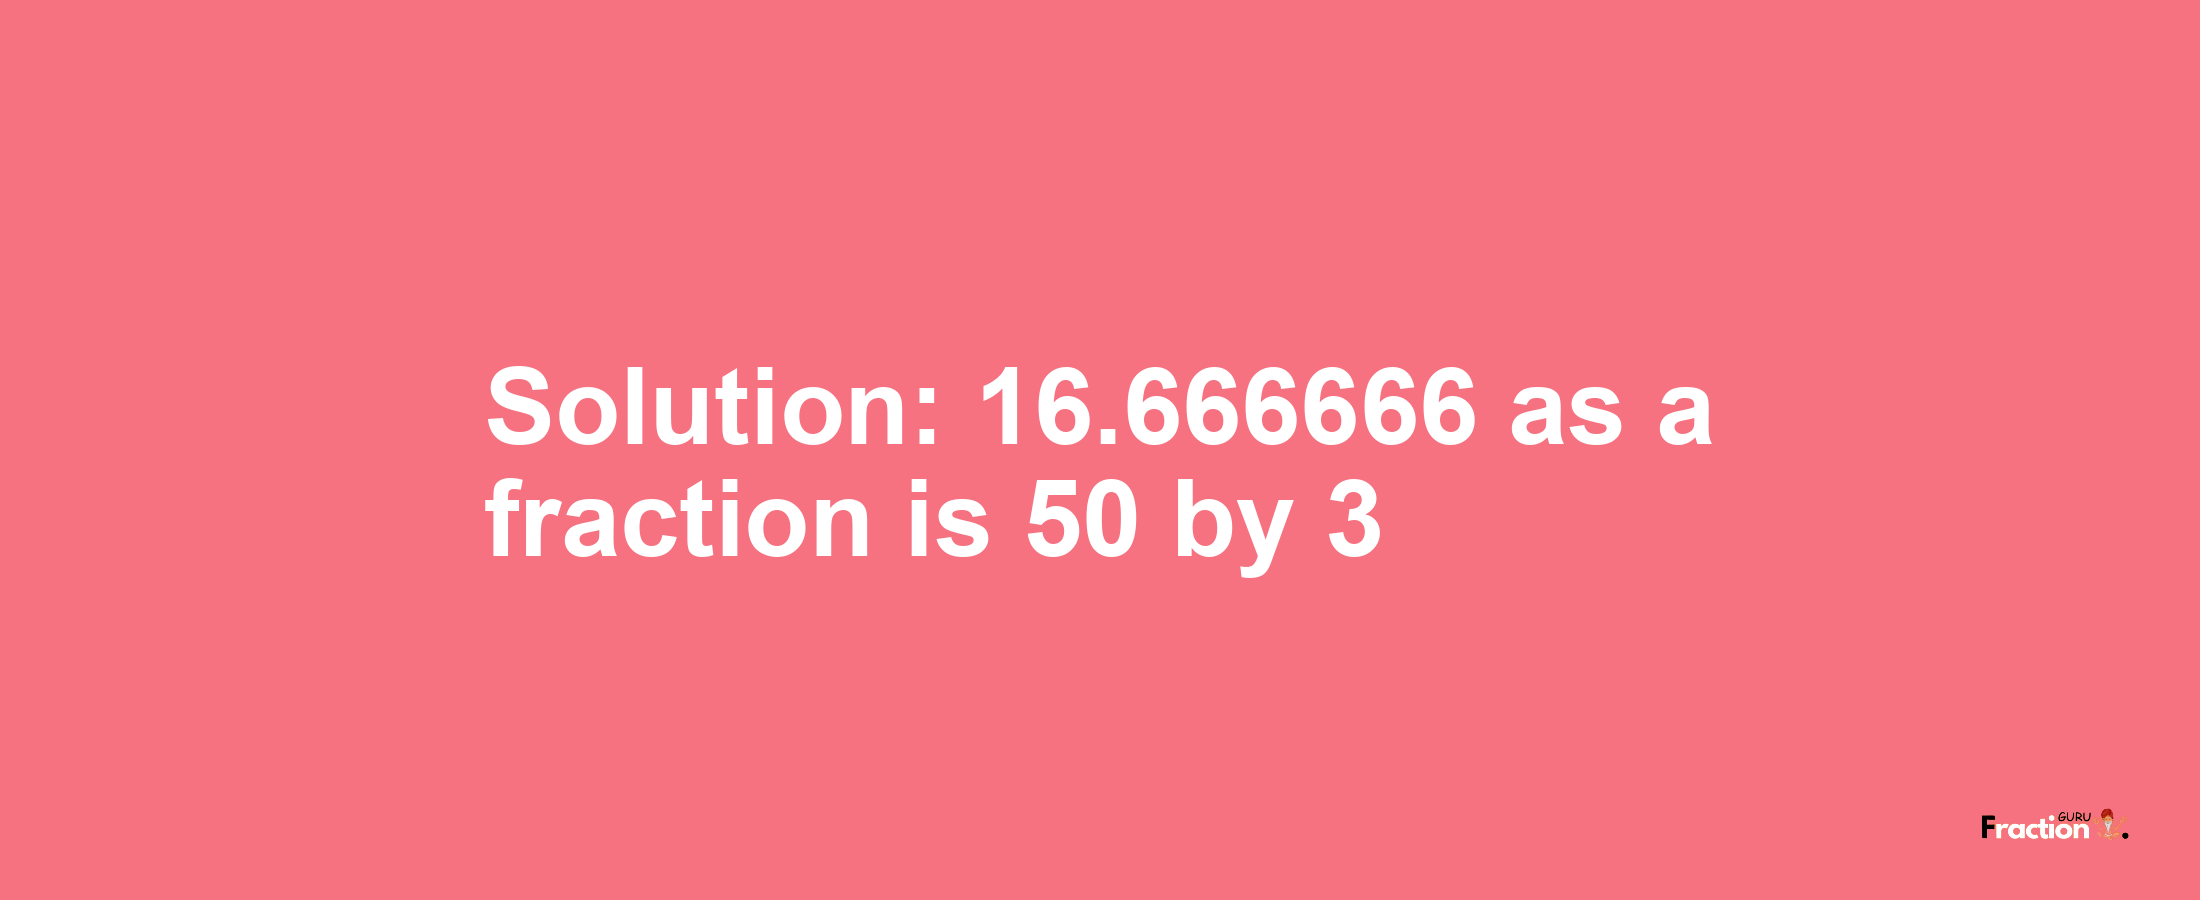 Solution:16.666666 as a fraction is 50/3